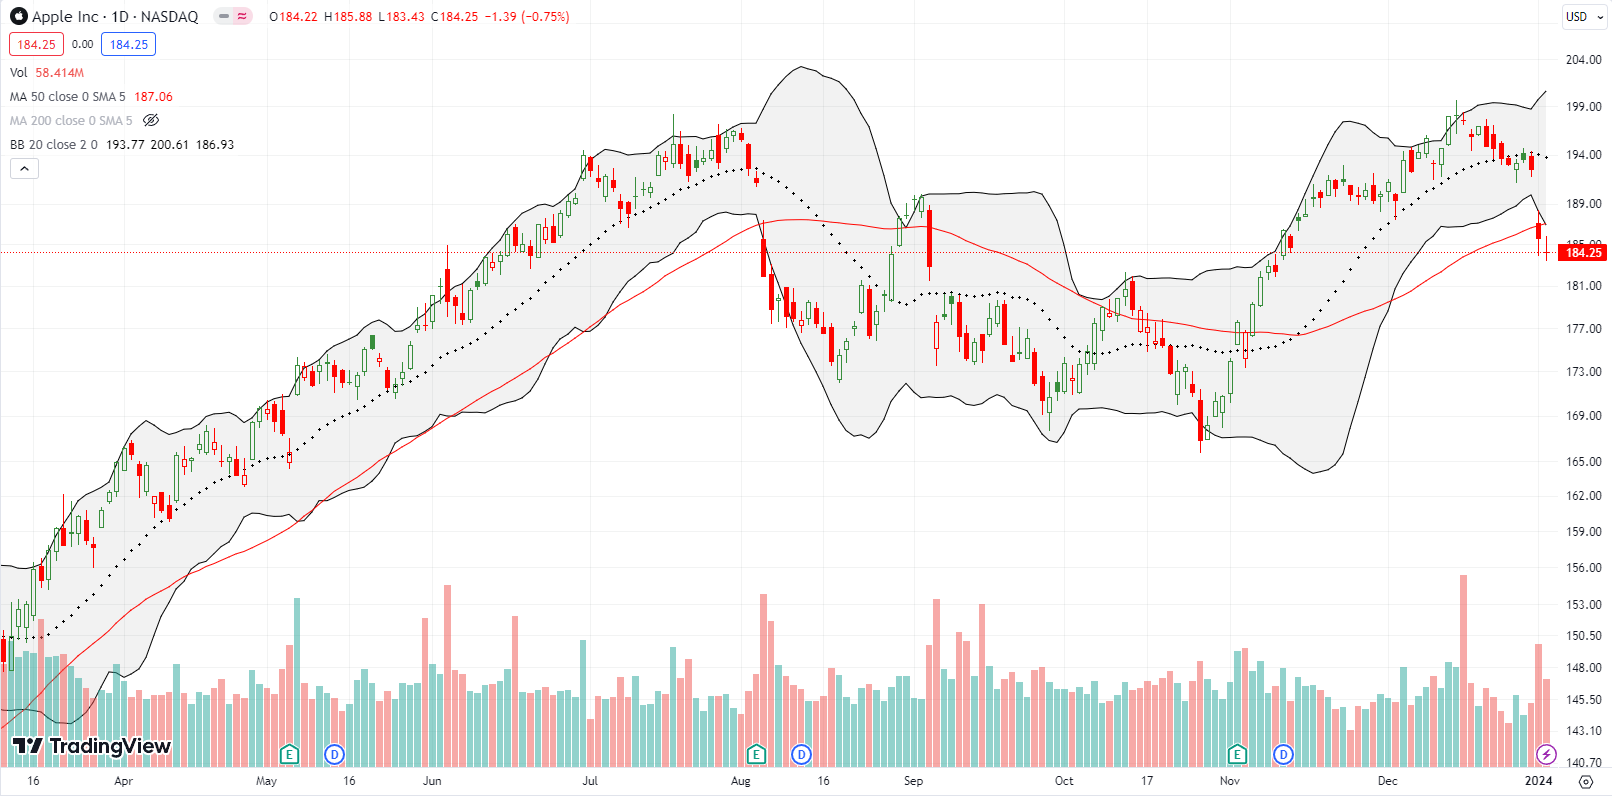 Apple Inc (AAPL) lost the rest of its December gains in an explosive fit of selling and a 50DMA breakdown.